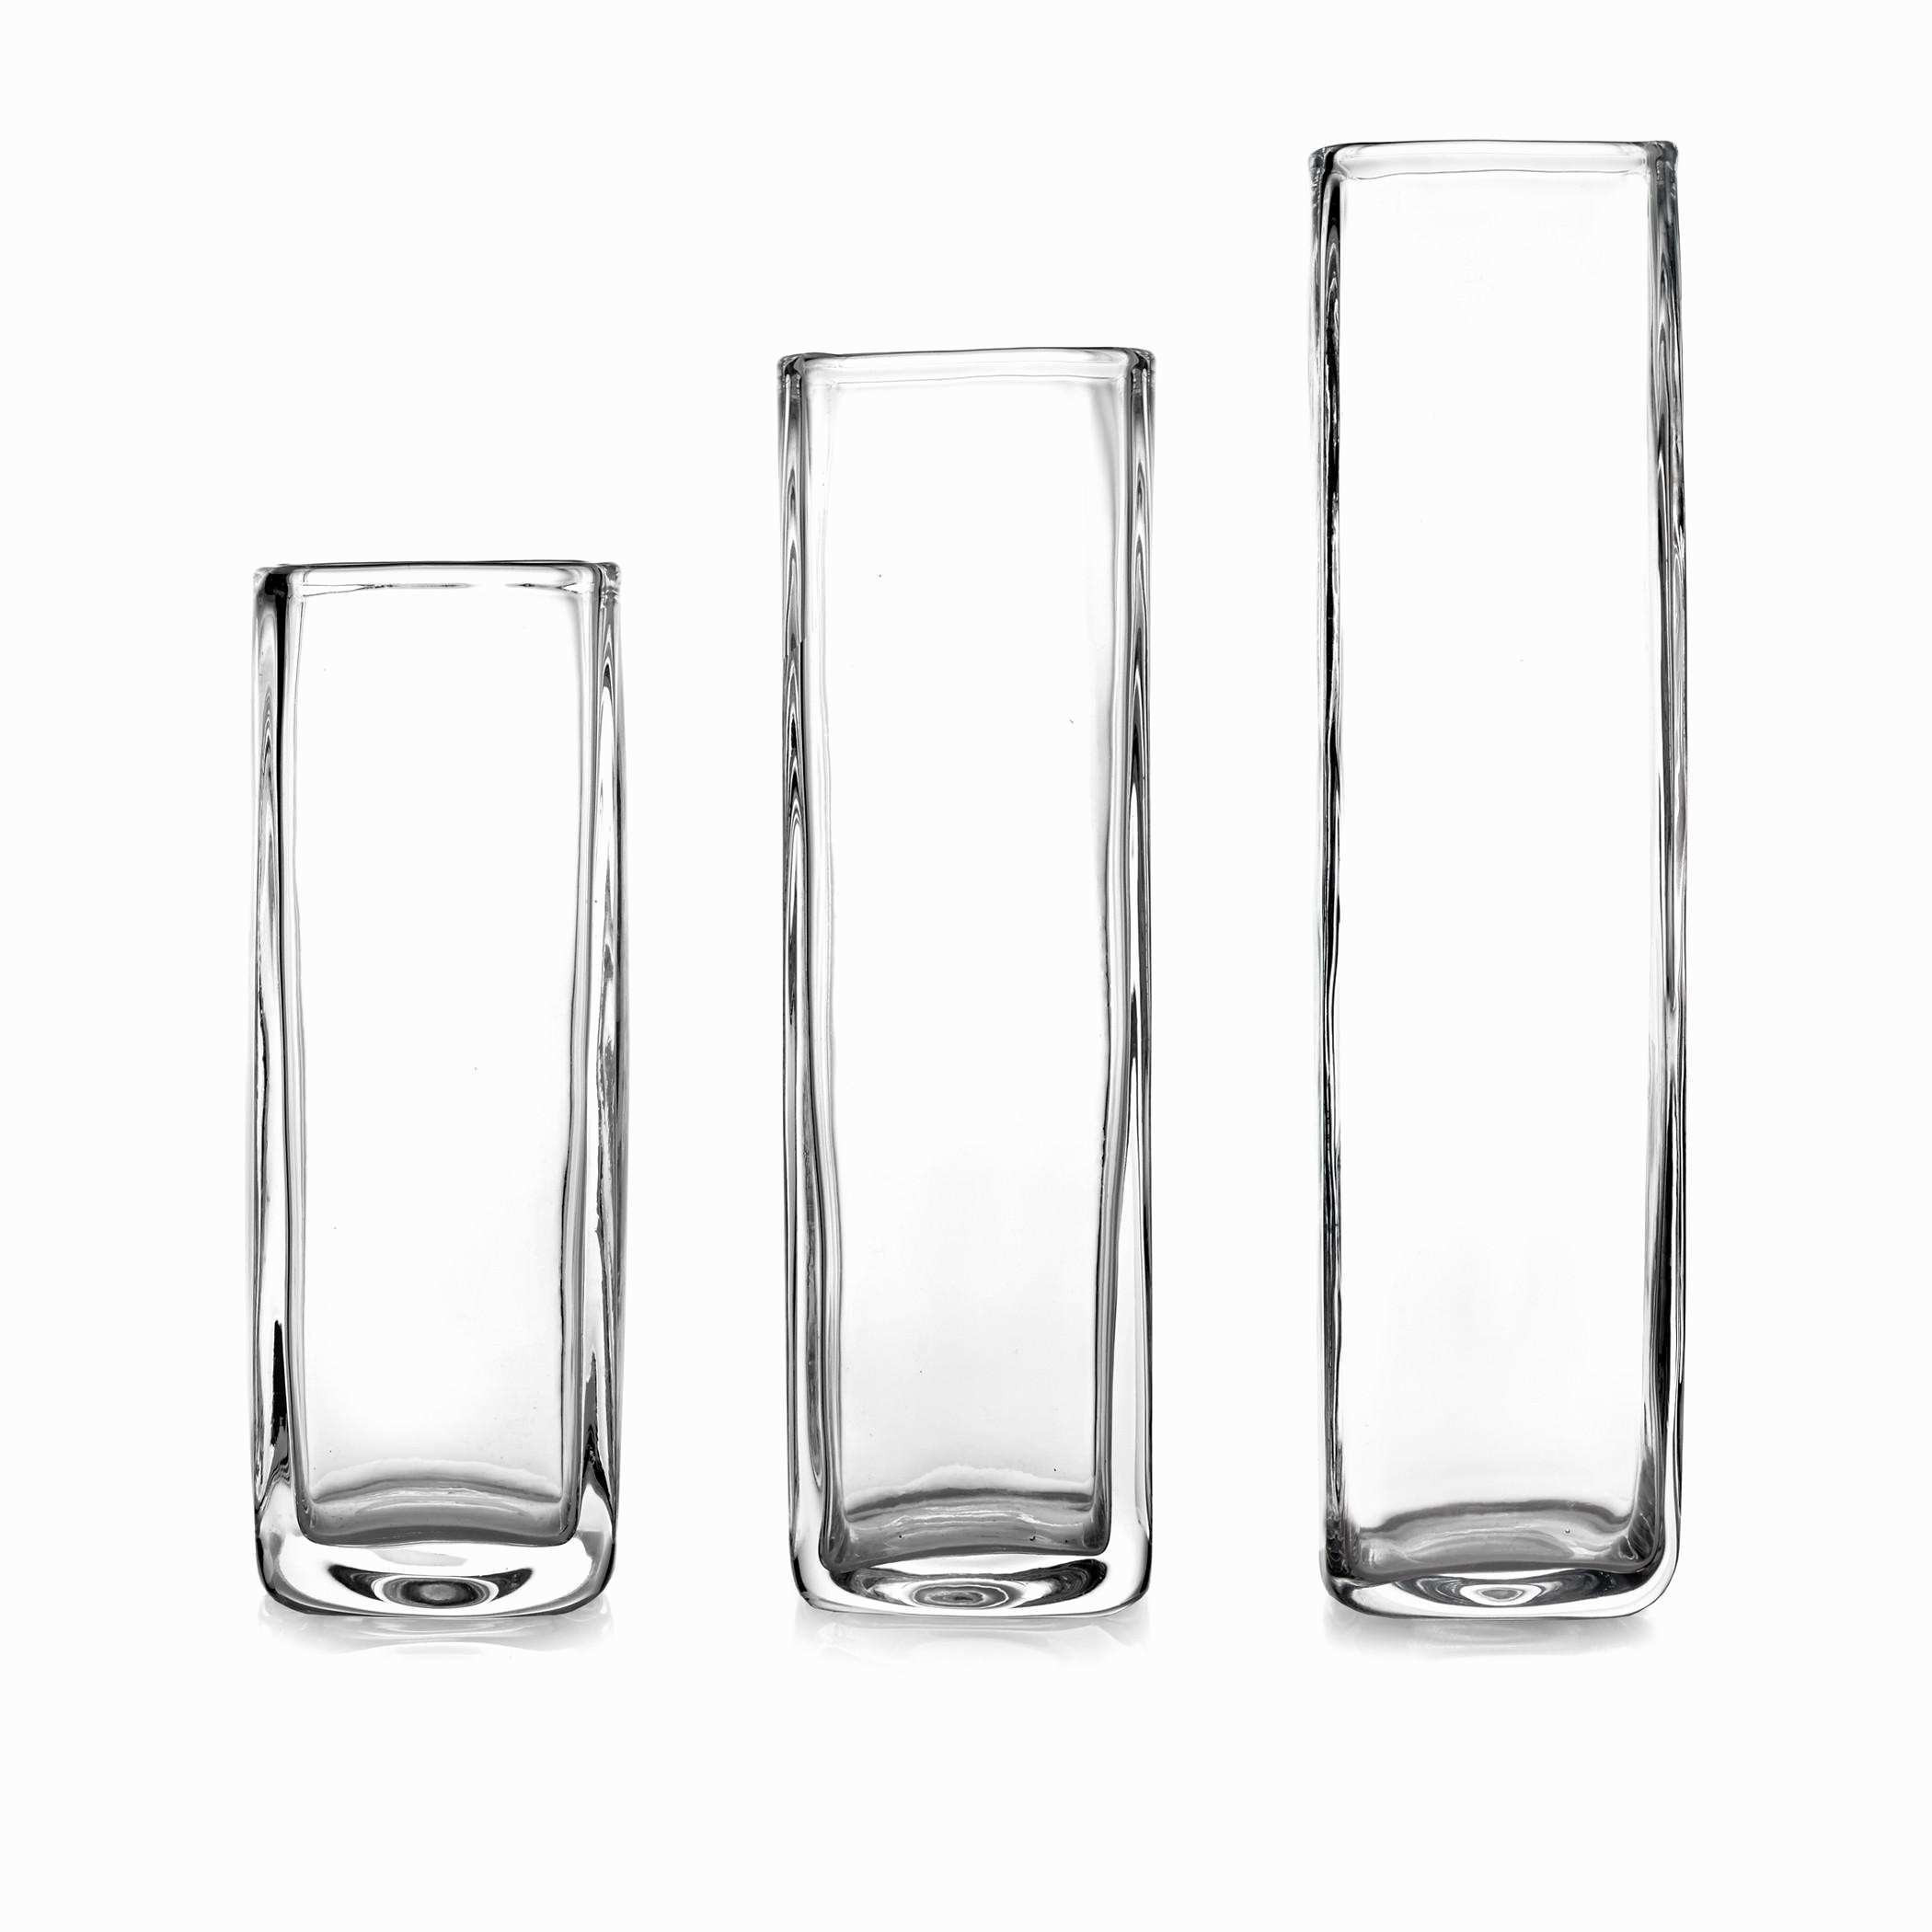 16 glass cylinder vases wholesale of black glass vases photos vases flower vase coloring page pages intended for black glass vases images glass wedding centerpieces inspirational living room tall glass of black glass vases